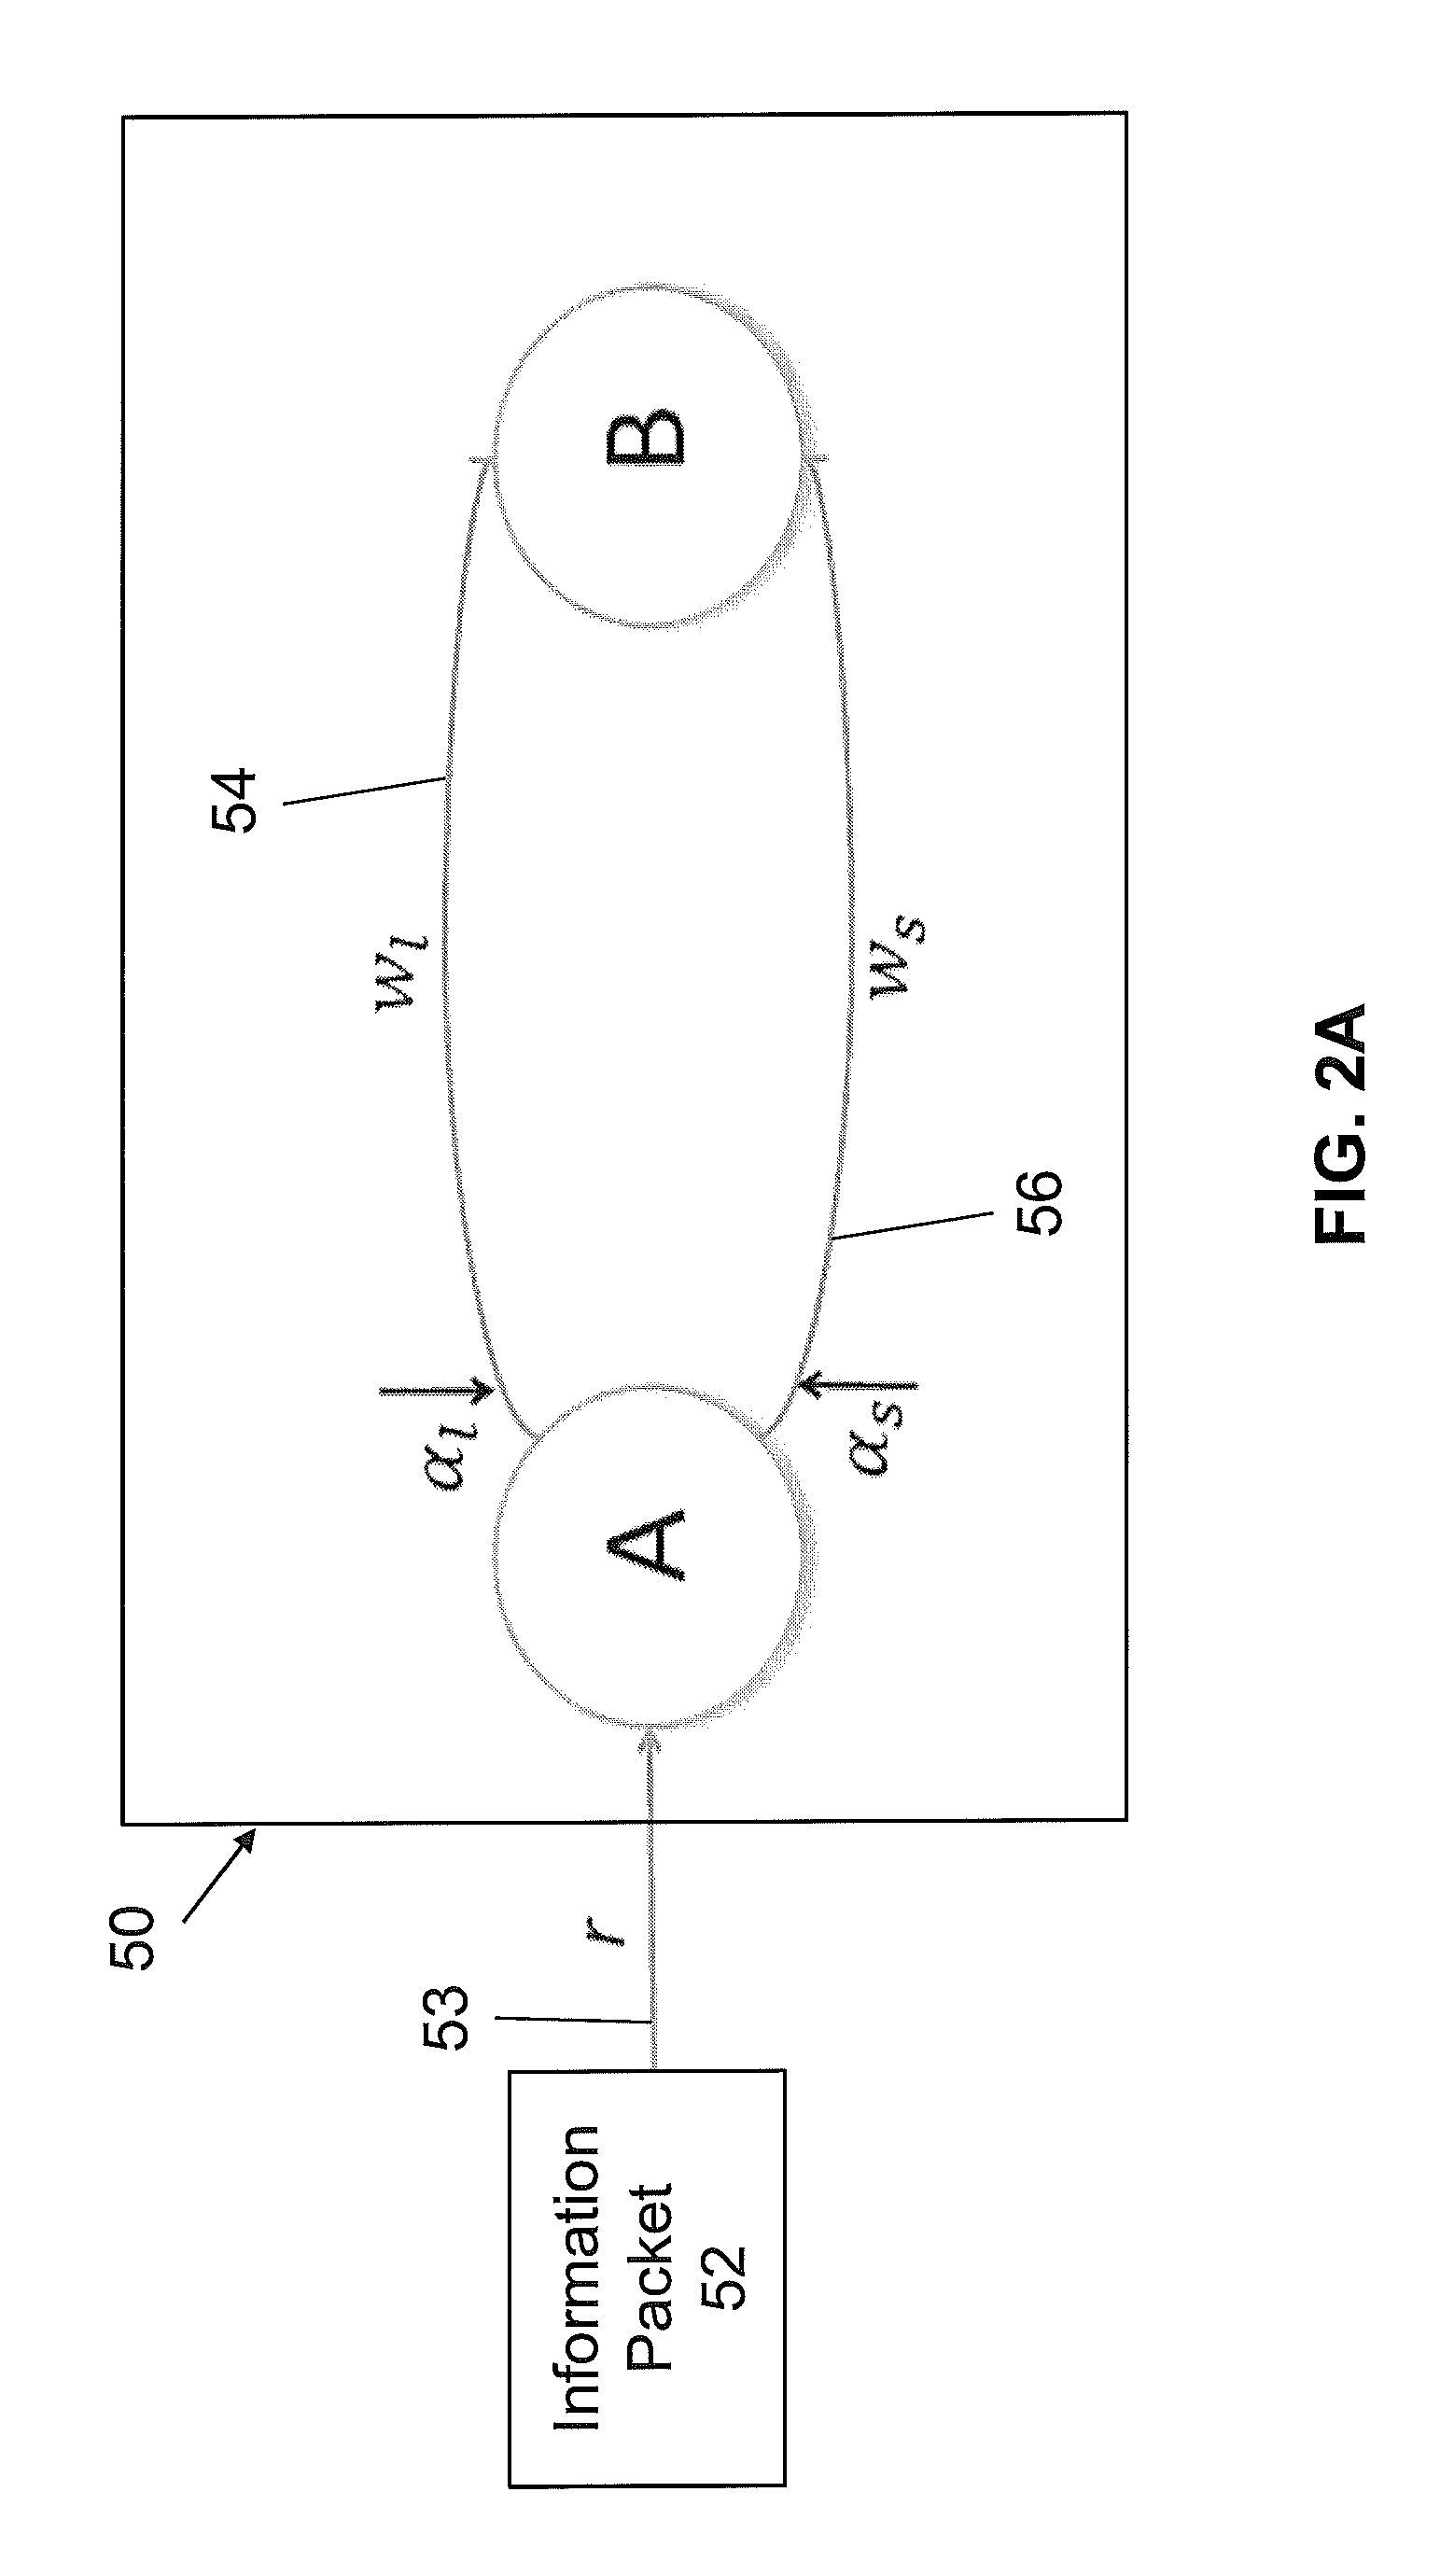 System and methods for improved network routing